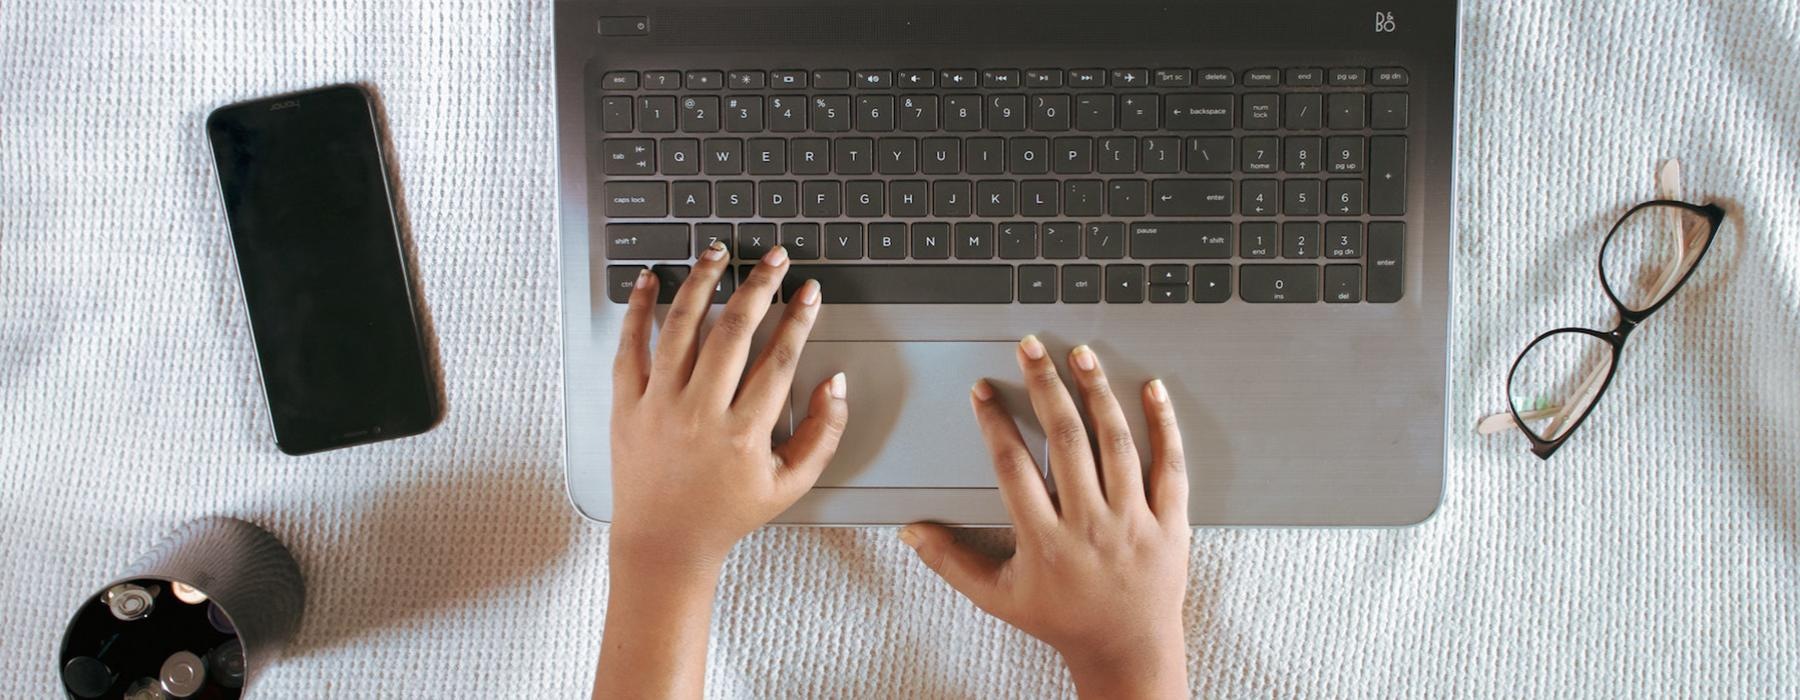 a person's hands on a laptop